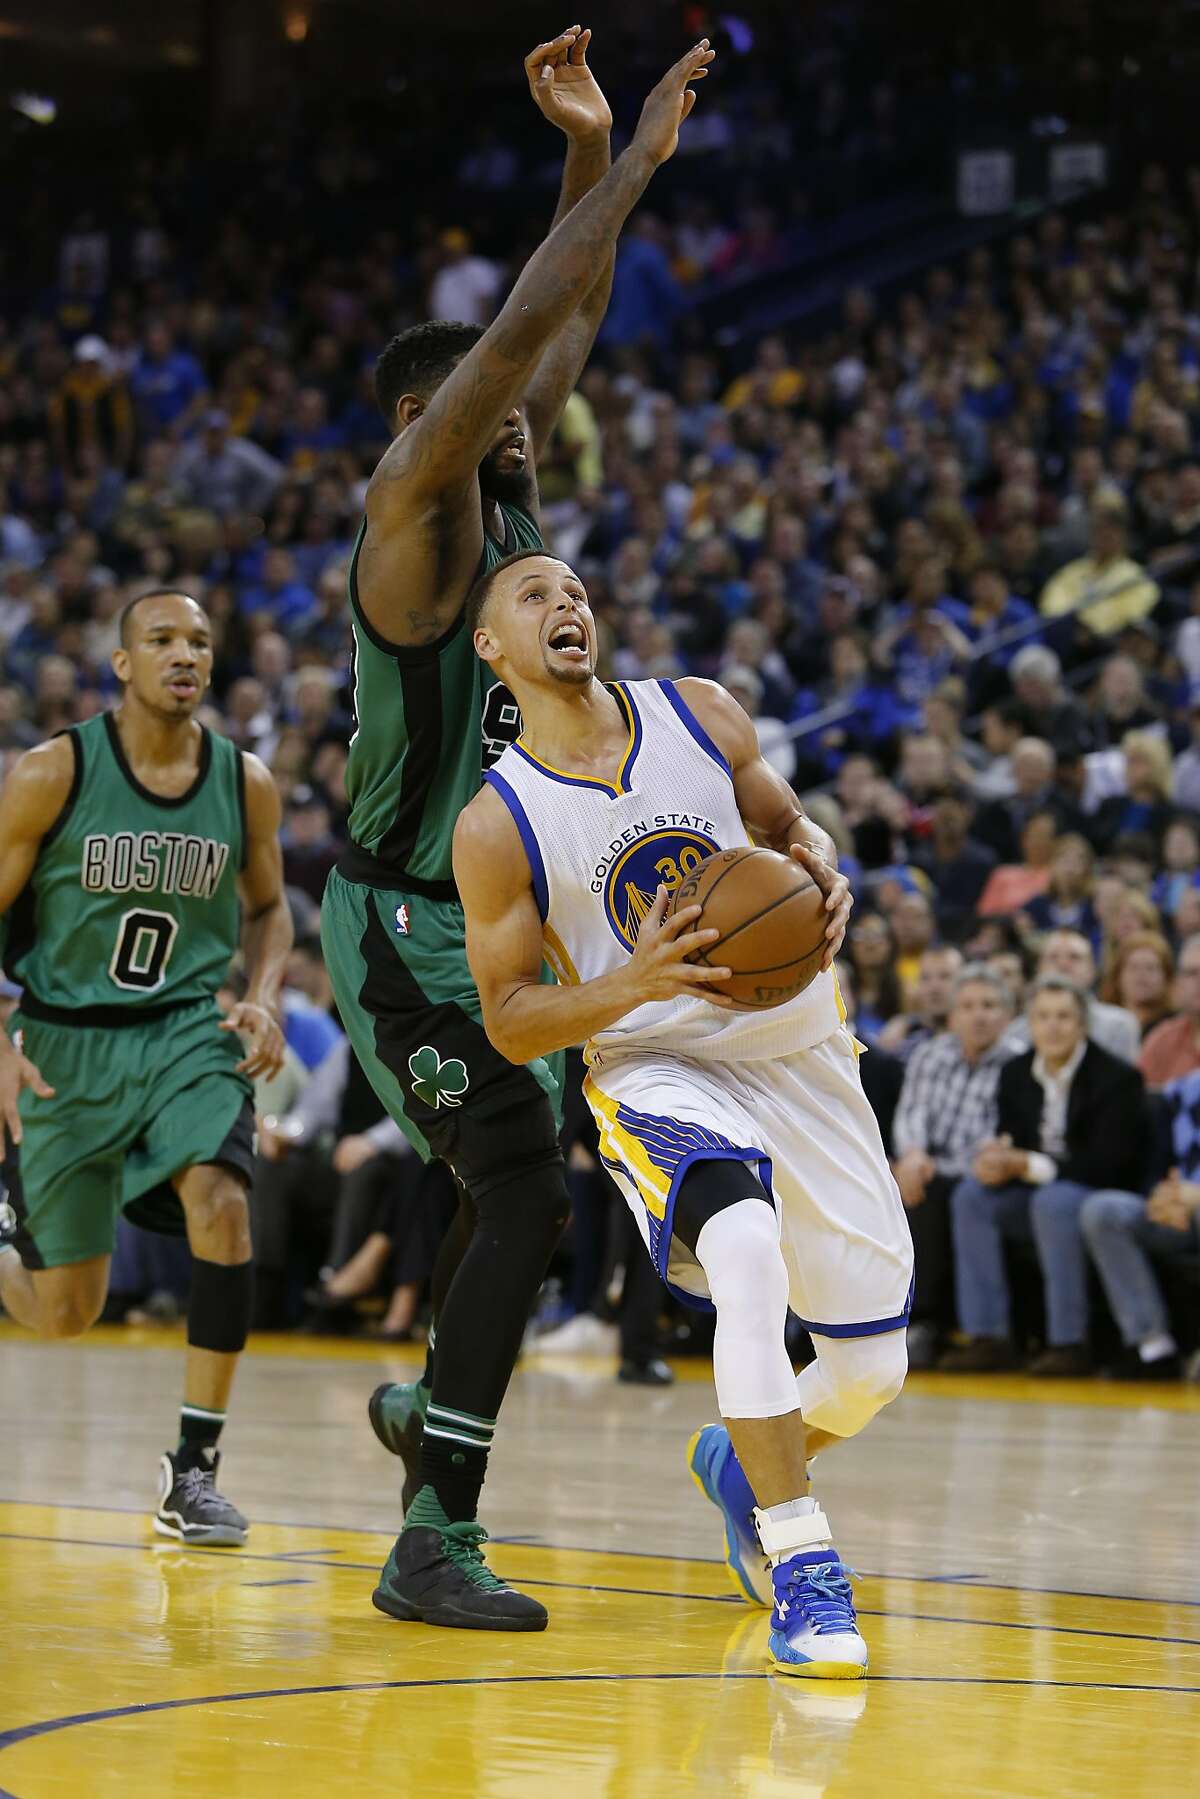 Warriors' Stephen Curry, 30 drives past the Celtics' Amir Johnson, 90 in the second half, as the Golden State Warriors went on to lose to the Boston Celtics 106-109 in NBA action at Oracle Arena, in Oakland, California, on Fri. April 1, 2016